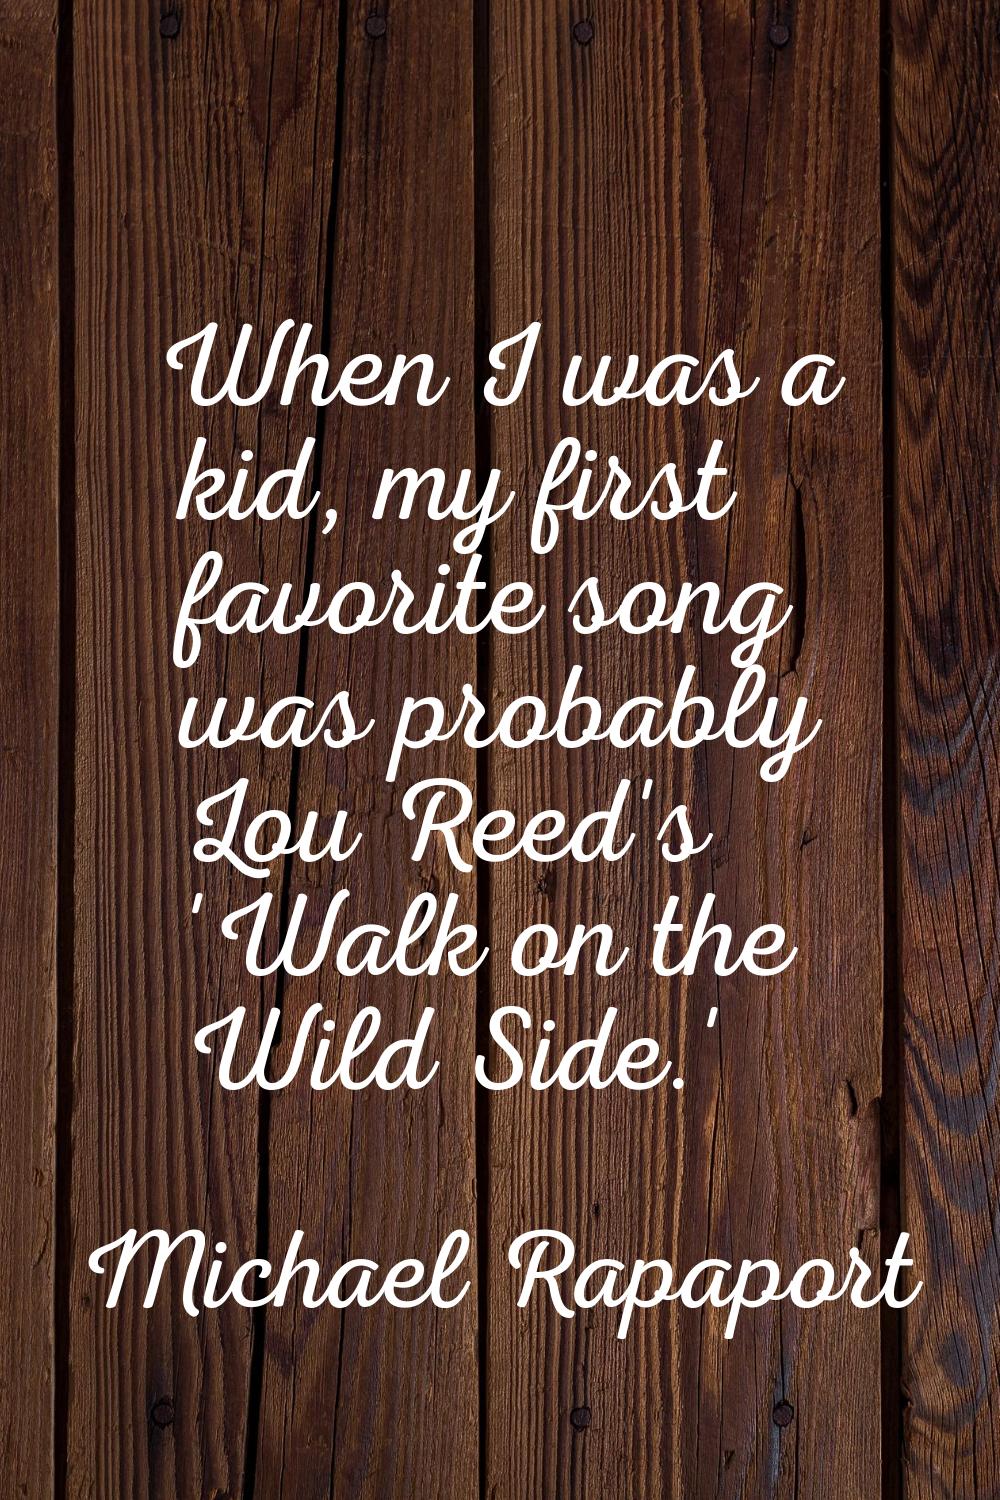 When I was a kid, my first favorite song was probably Lou Reed's 'Walk on the Wild Side.'